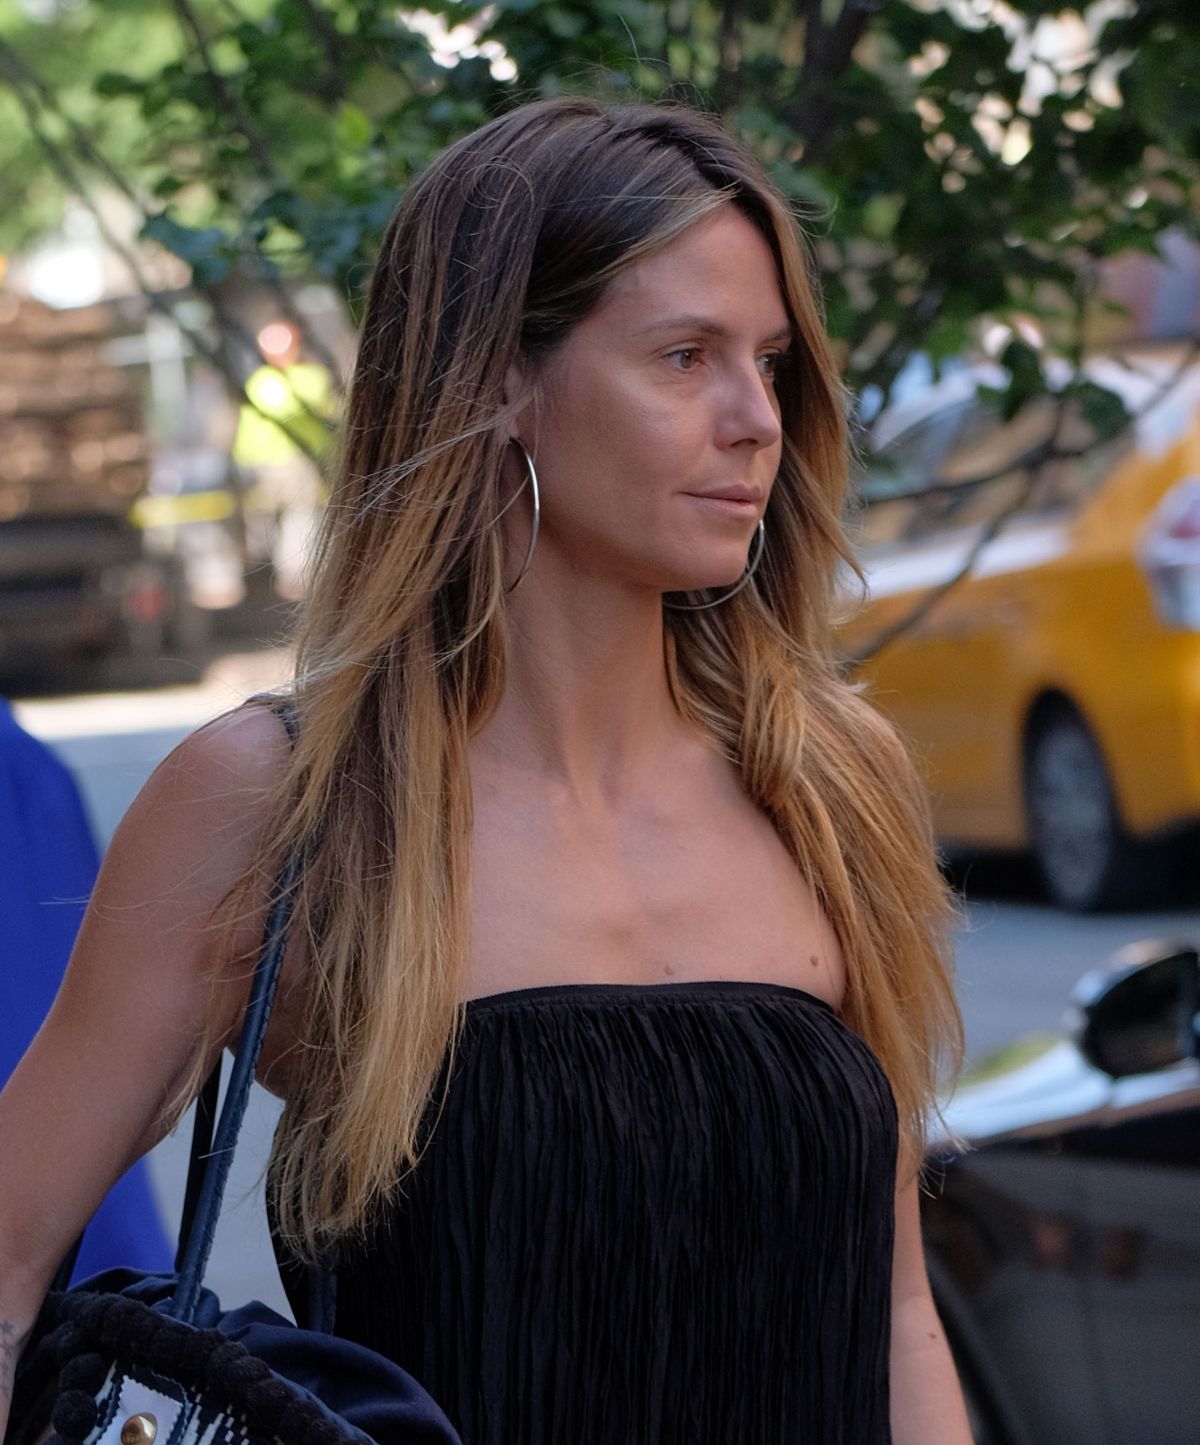 HEIDI KLUM Out Make-up Free in New York 06/13/2017 – HawtCelebs